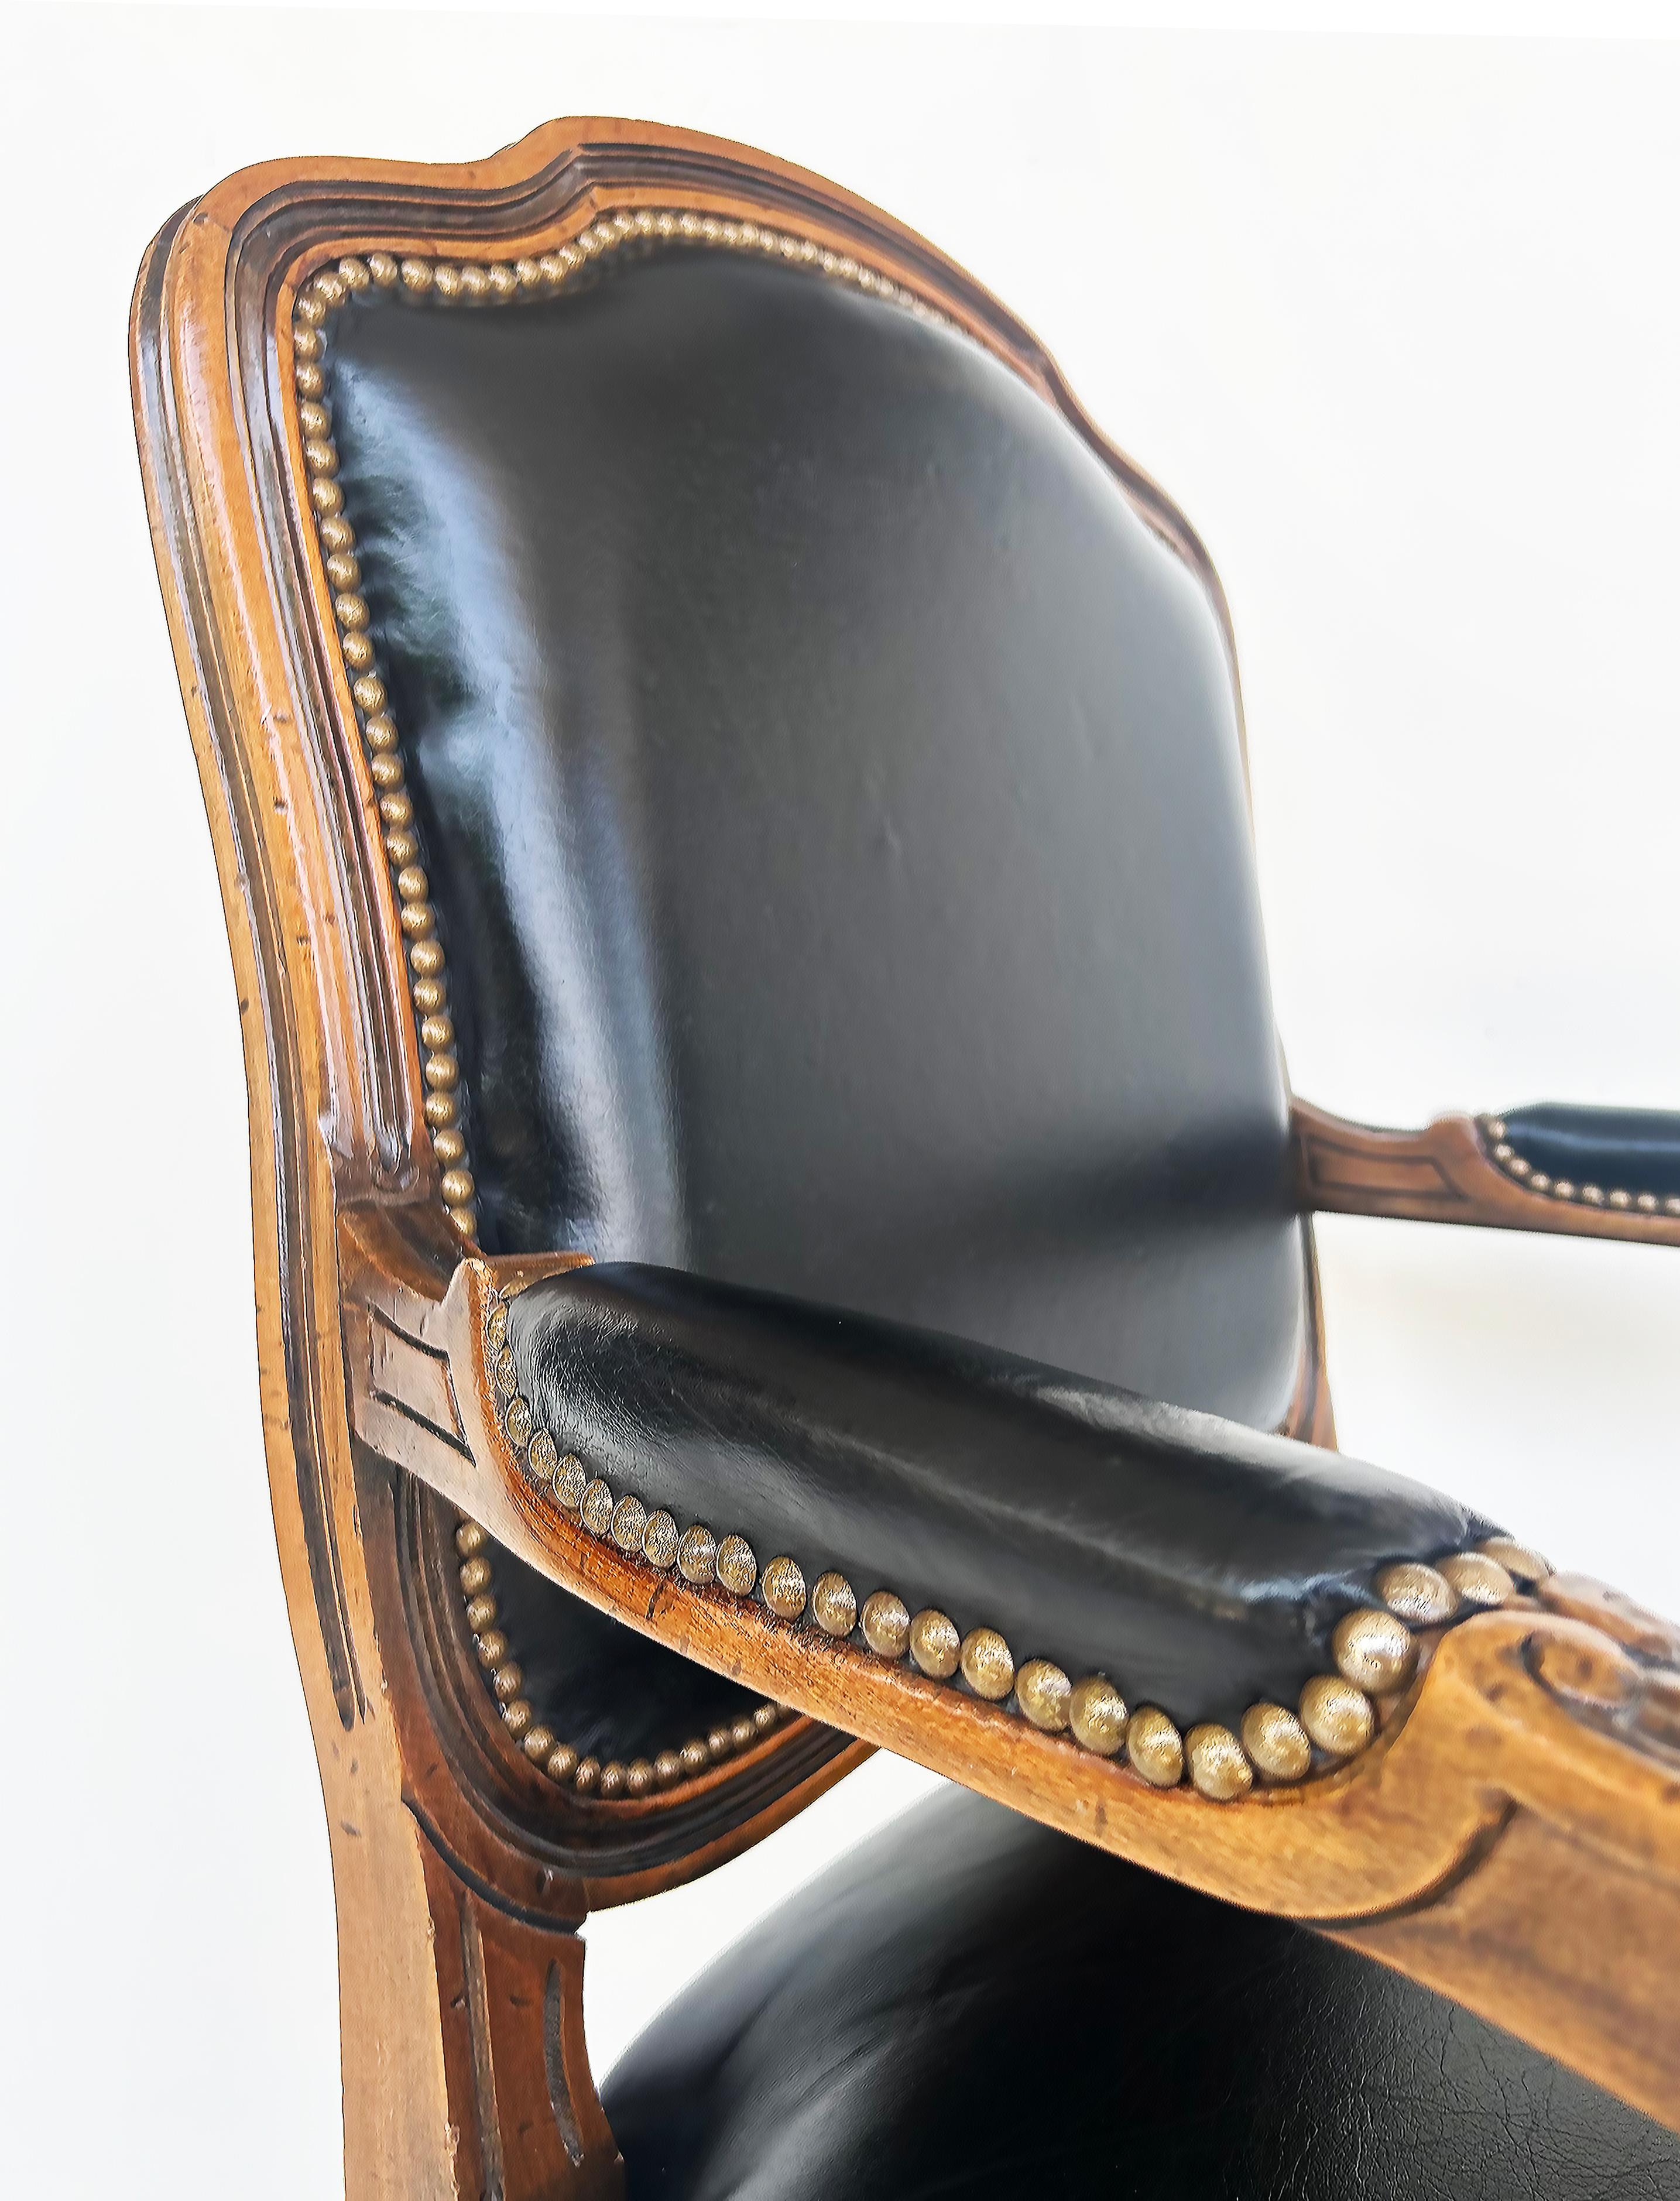 Vintage Italian Chateau D'Ax Leather Armchairs with Brass Nailhead Details, Pair For Sale 3